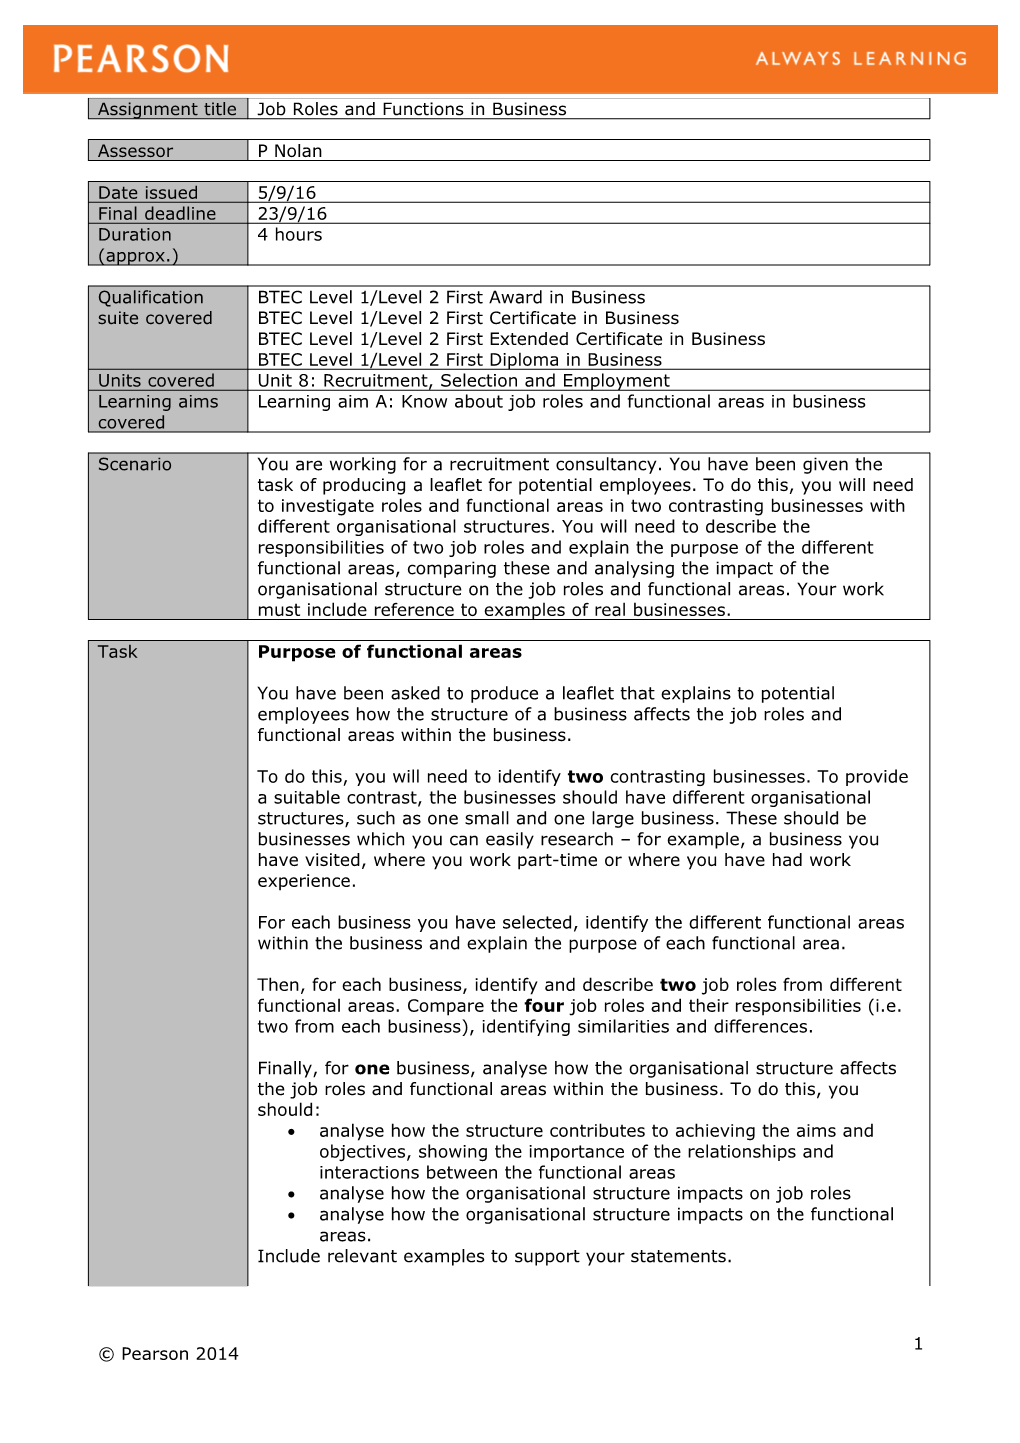 Unit 8: Recruitment, Selection and Employment. Authorised Assignment Brief for Learning